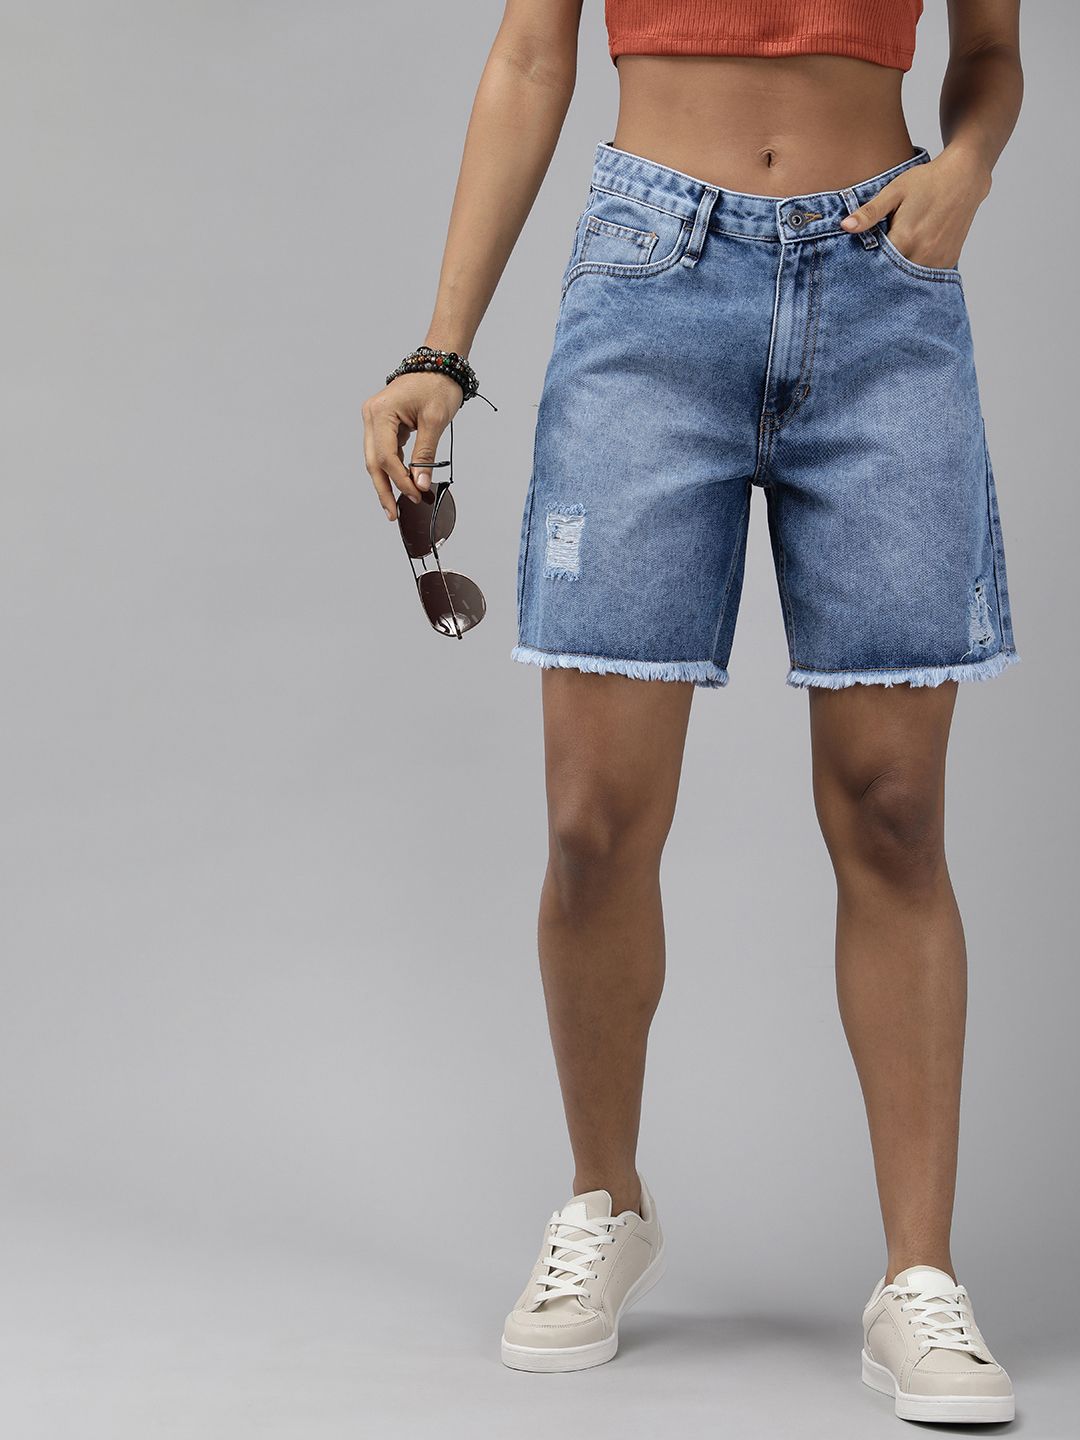 The Roadster Life Co. Women Washed High-Rise Frayed Hem Cotton Distressed Denim Shorts Price in India